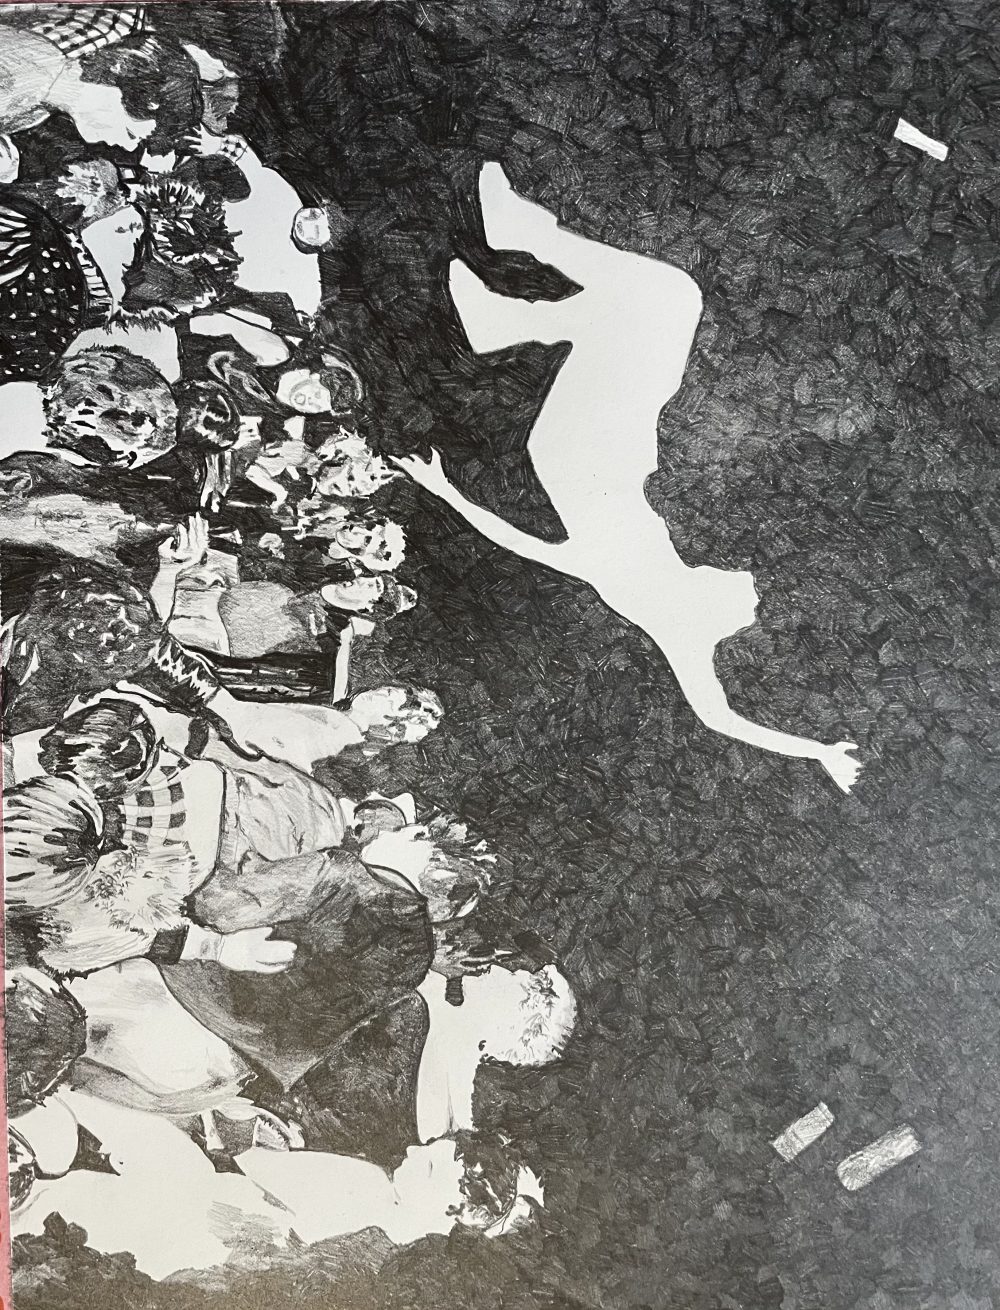 A graphite drawing of a crowd of people at a concert with the silhouette of a stage diver falling from above.